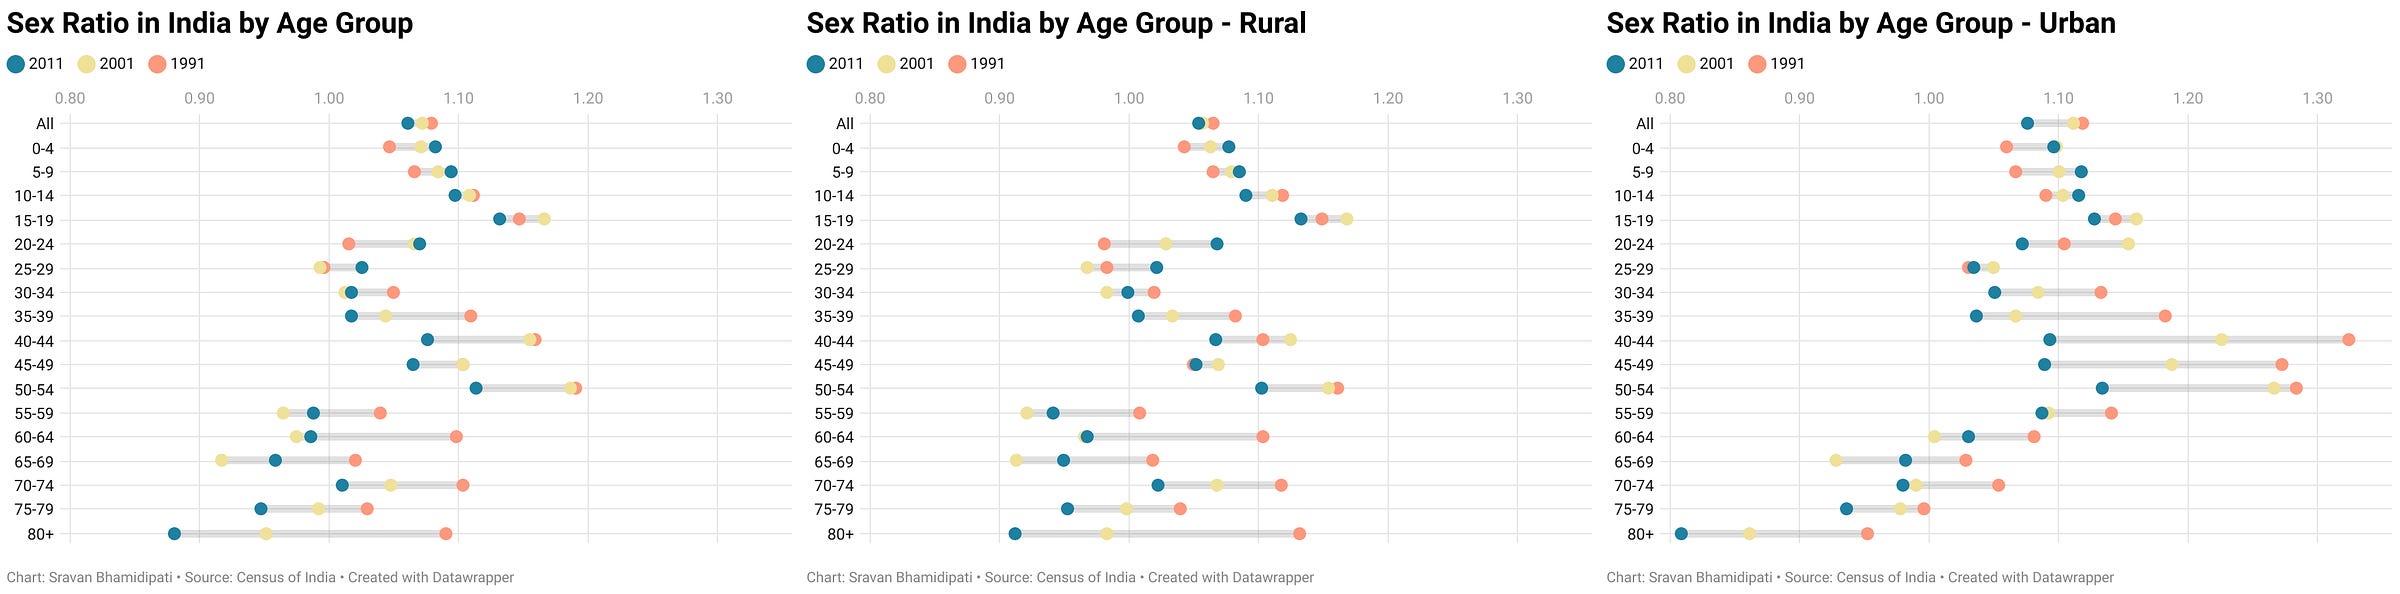 Sex ratio in India by age group, from 1991 to 2011